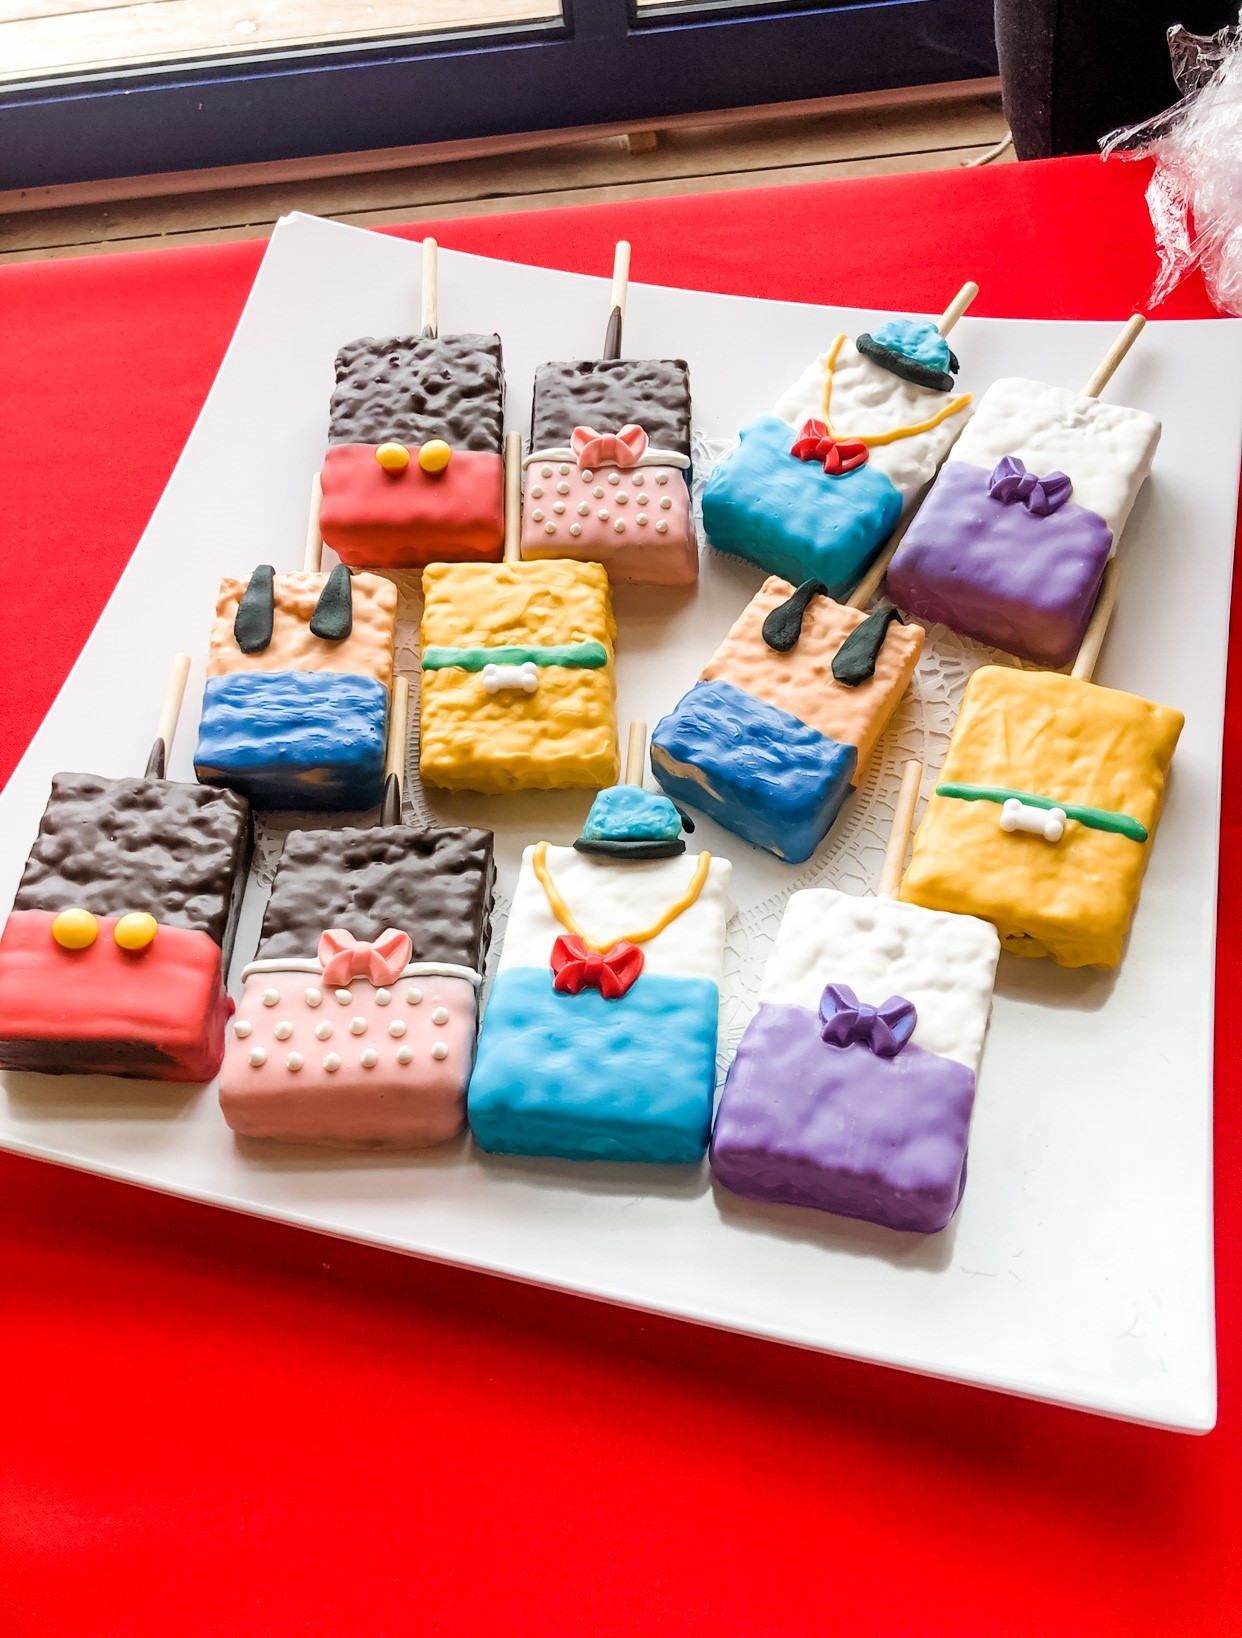 Chocolate covered rice krispy pops decorated like the characters from Mickey Mouse Clubhouse.